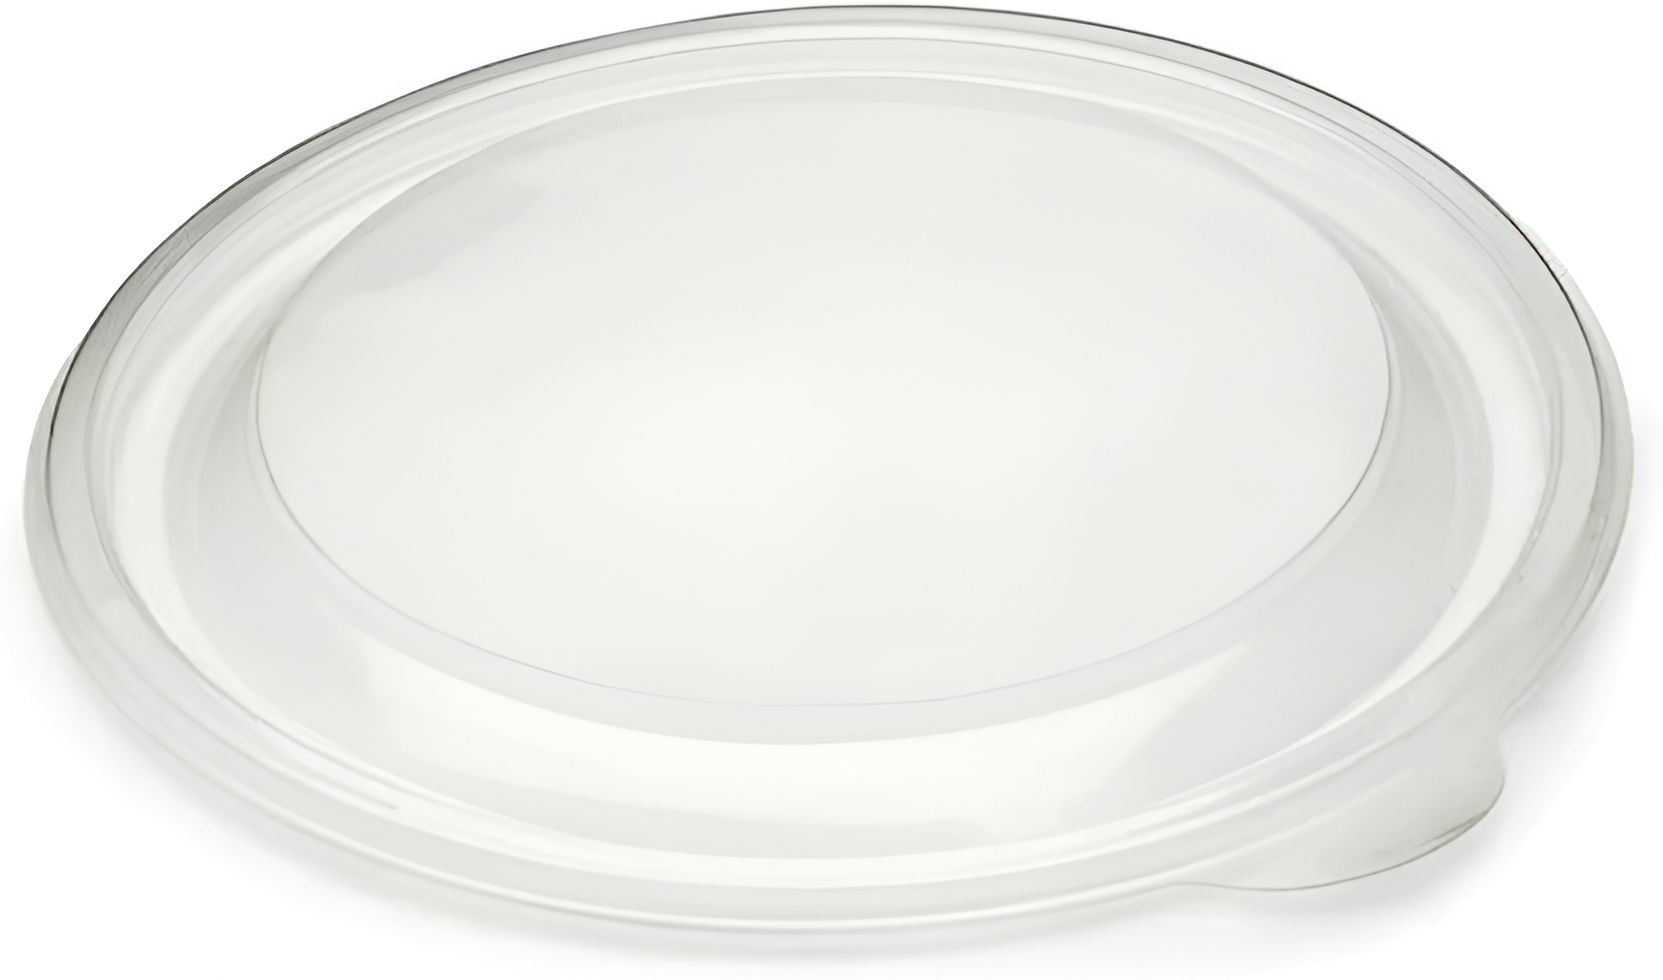 Sabert - FastPac 24 Oz Clear Vented Lid fits with Round Plastic Bowls, 500/Cs - 56024B300